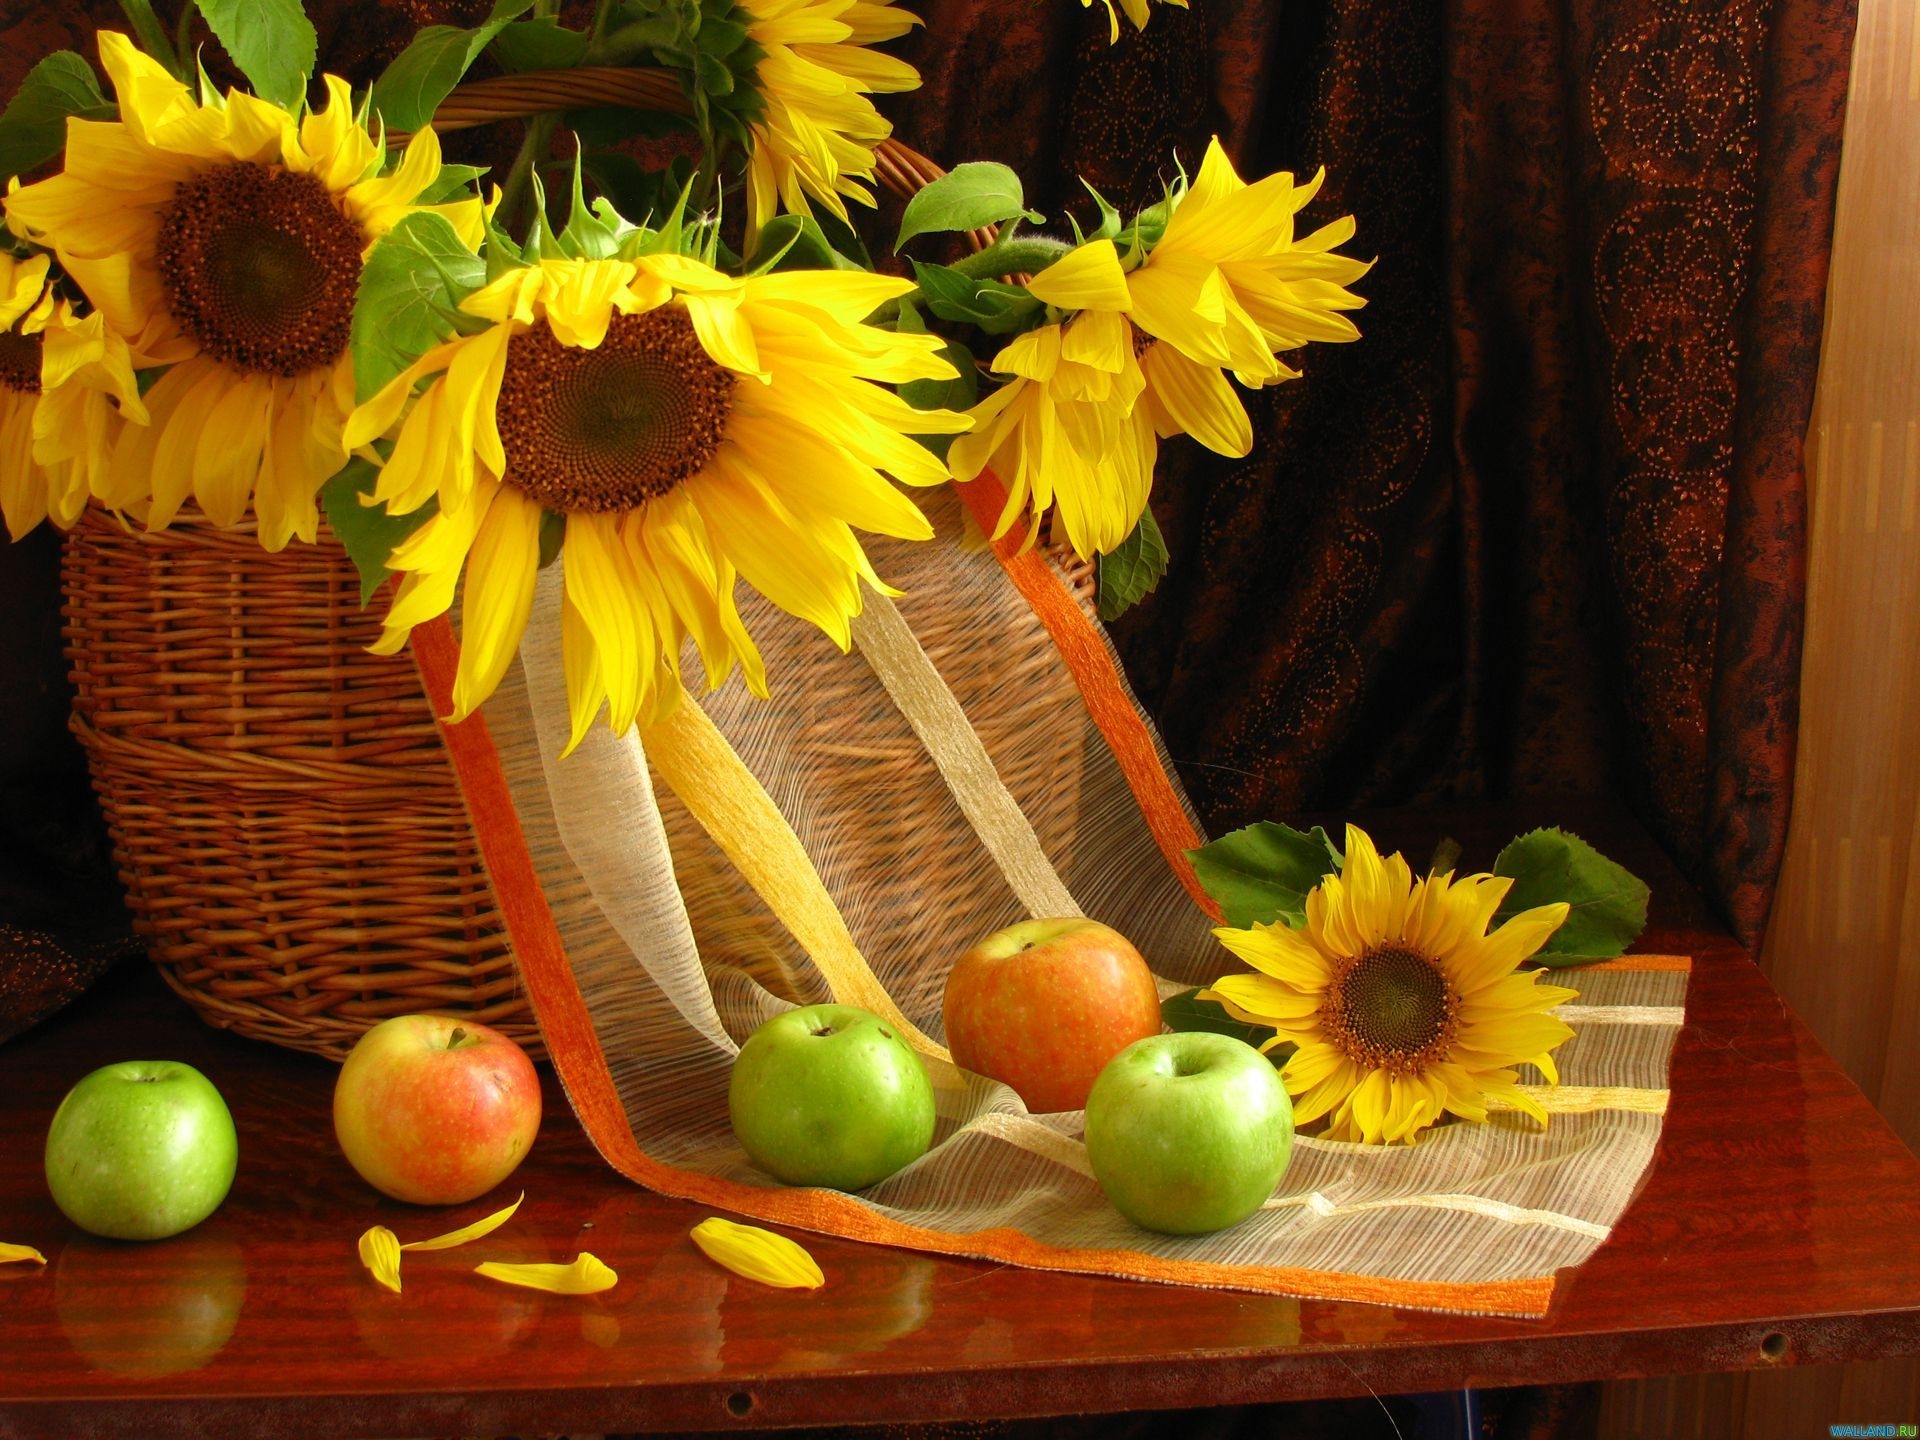 Mobile wallpaper sunflowers, flowers, leaves, apples, still life, table, basket, curtains